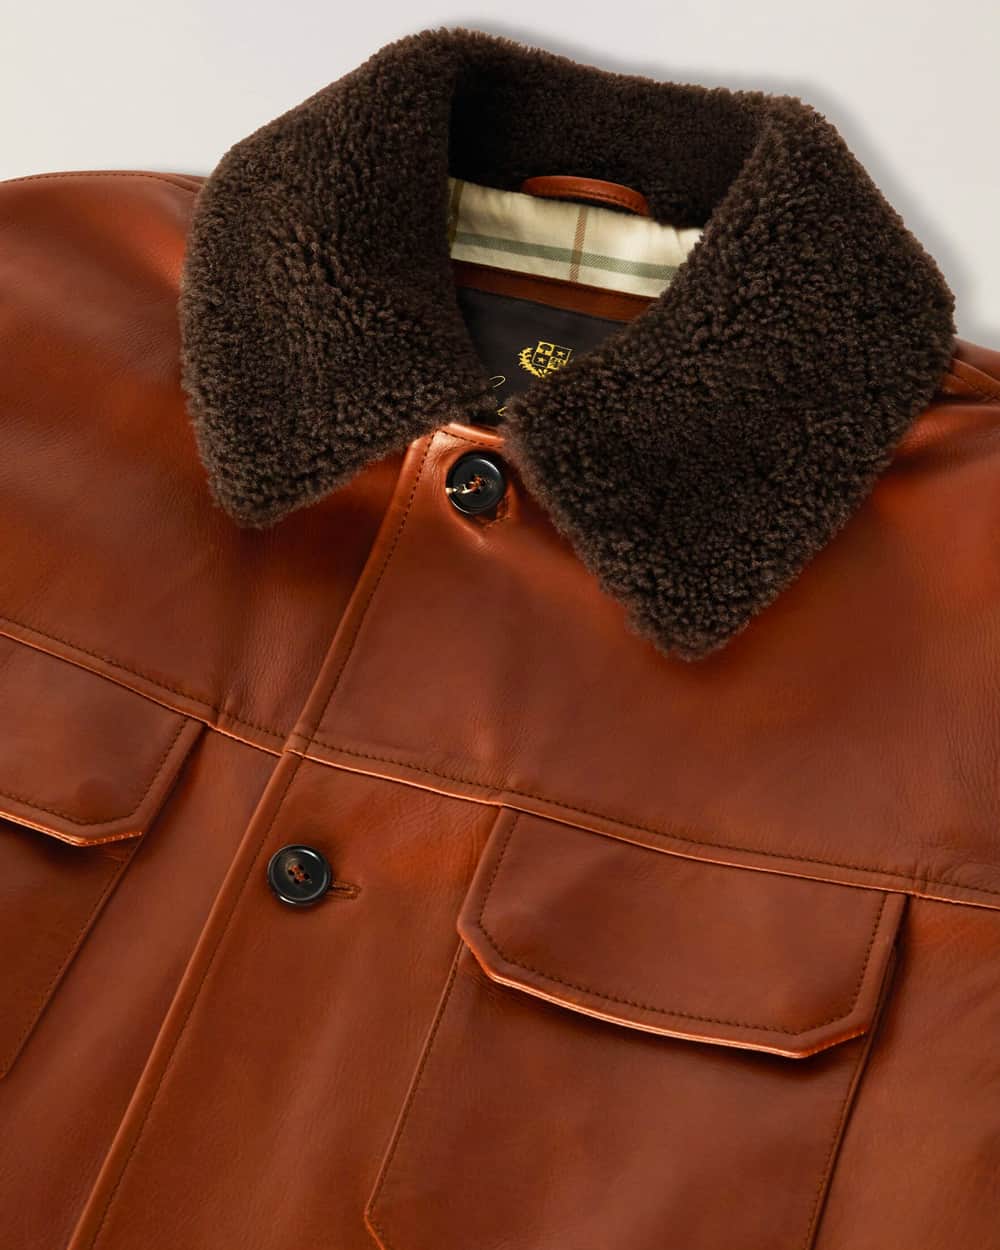 Close up of Loro Piana tan leather jacket with shearling collar